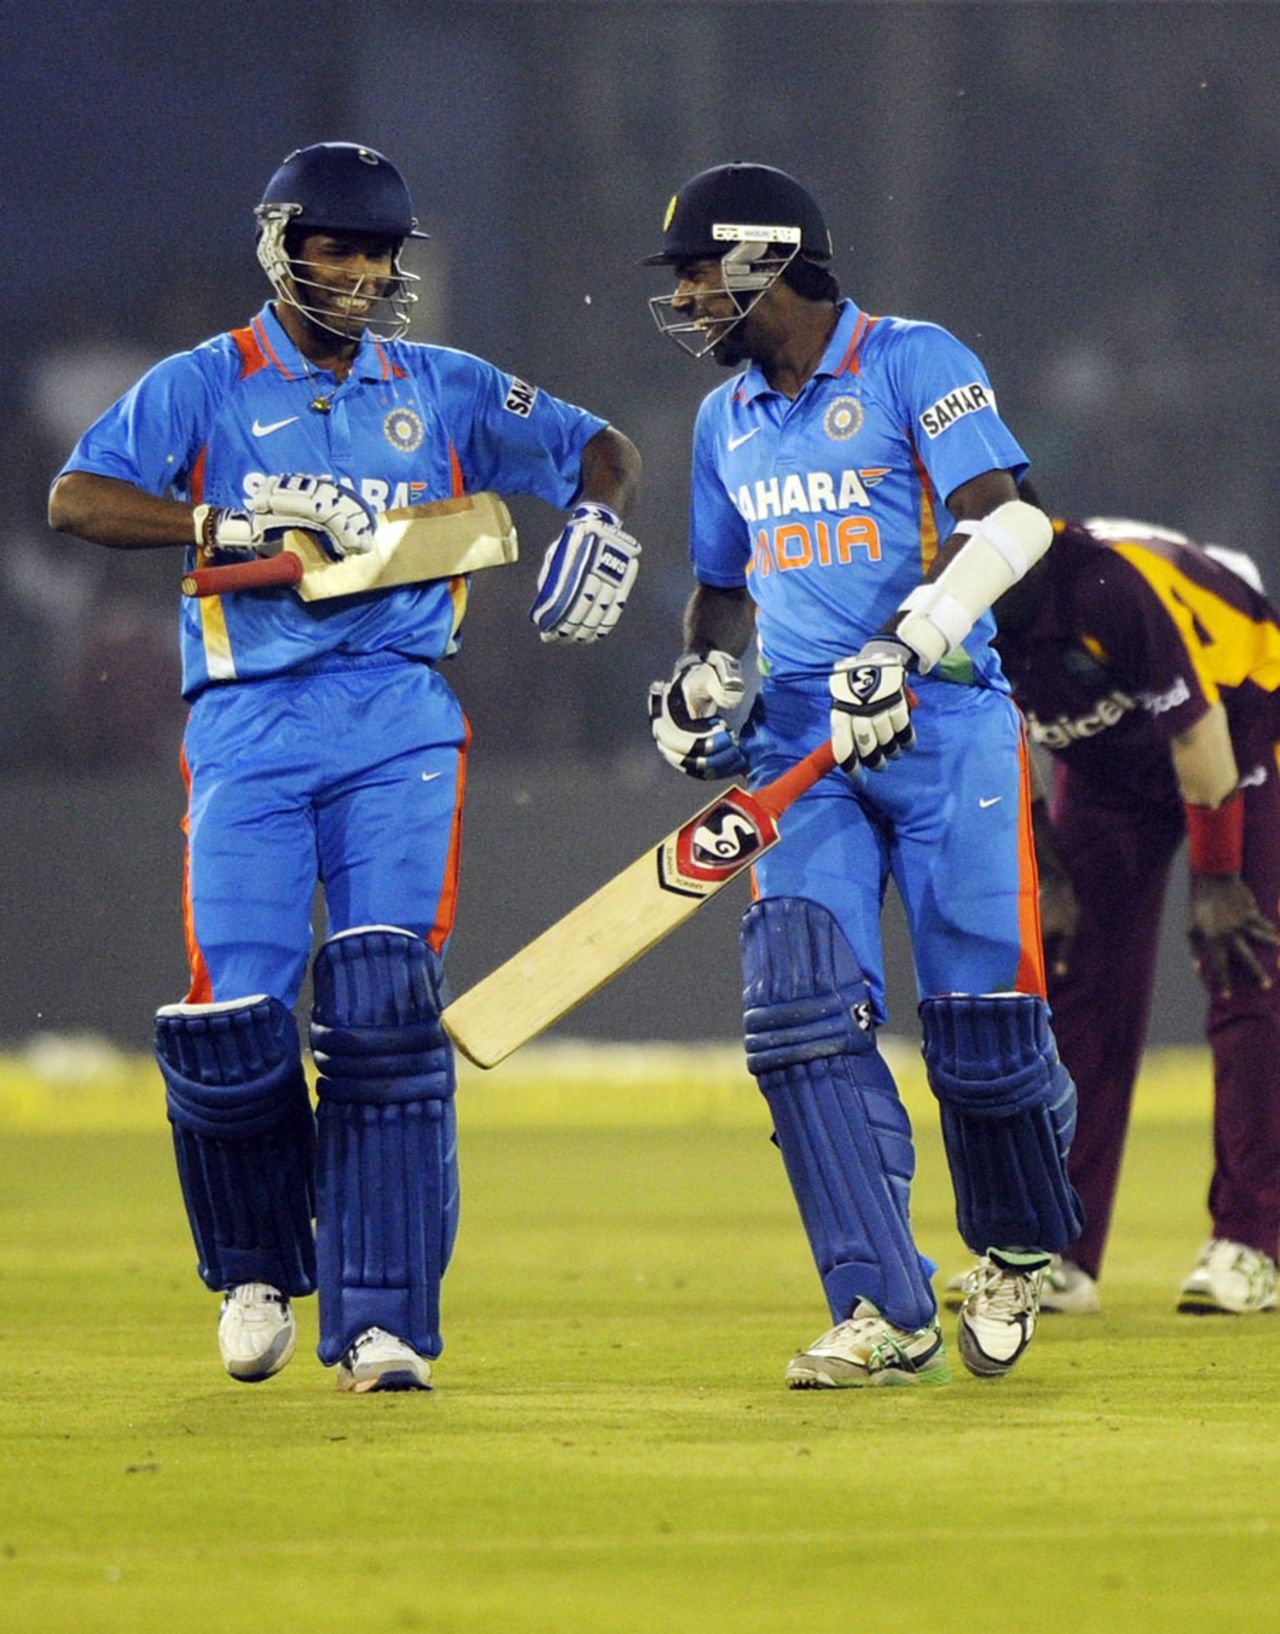 Umesh Yadav and Varun Aaron are all smiles after guiding India to a tense win, India v West Indies, 1st ODI, Cuttack, November 29, 2011